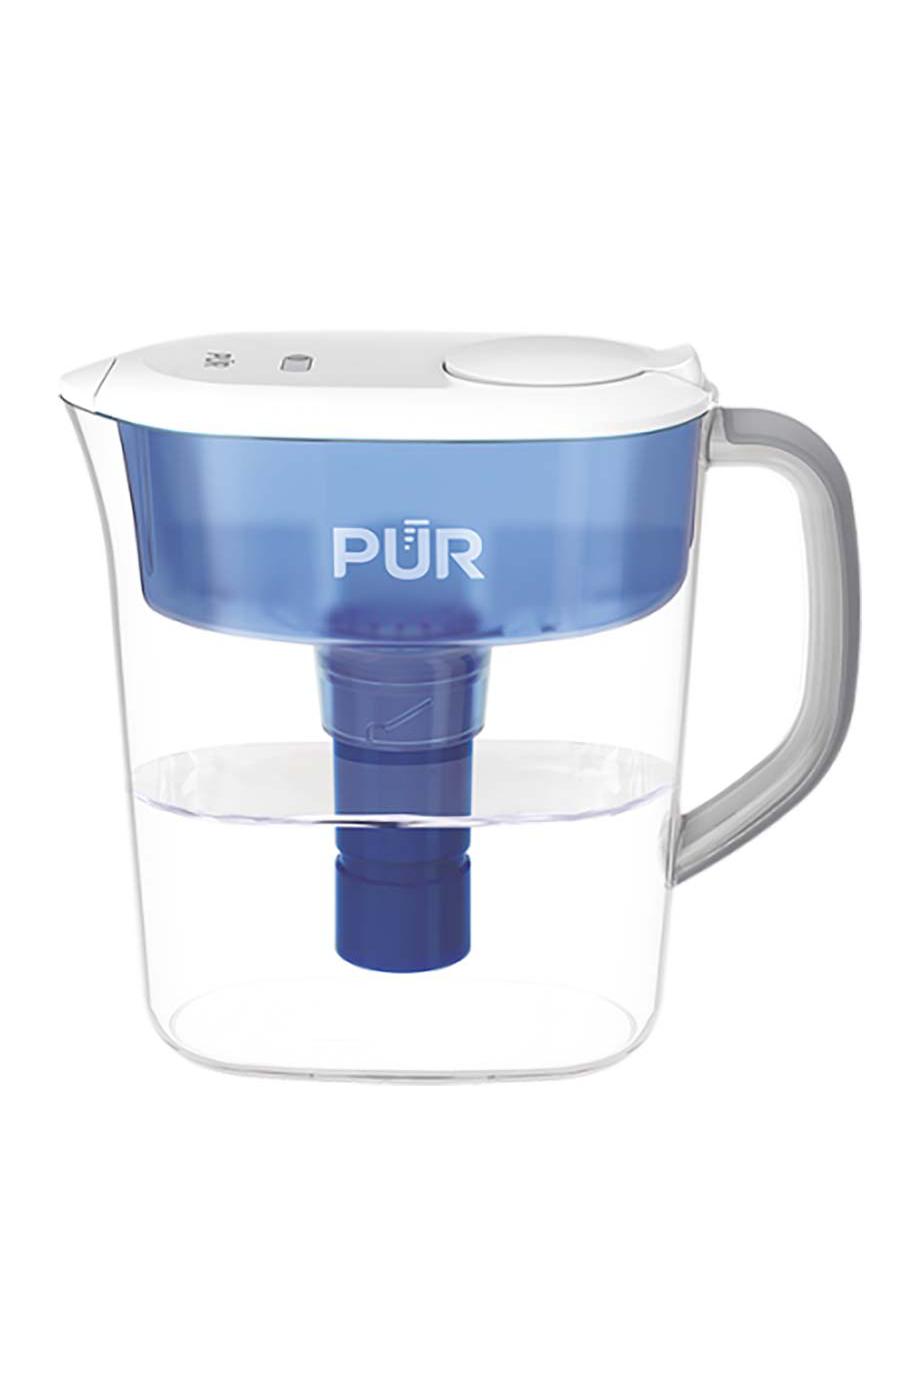 PUR PLUS Pitcher Filtration System; image 2 of 2